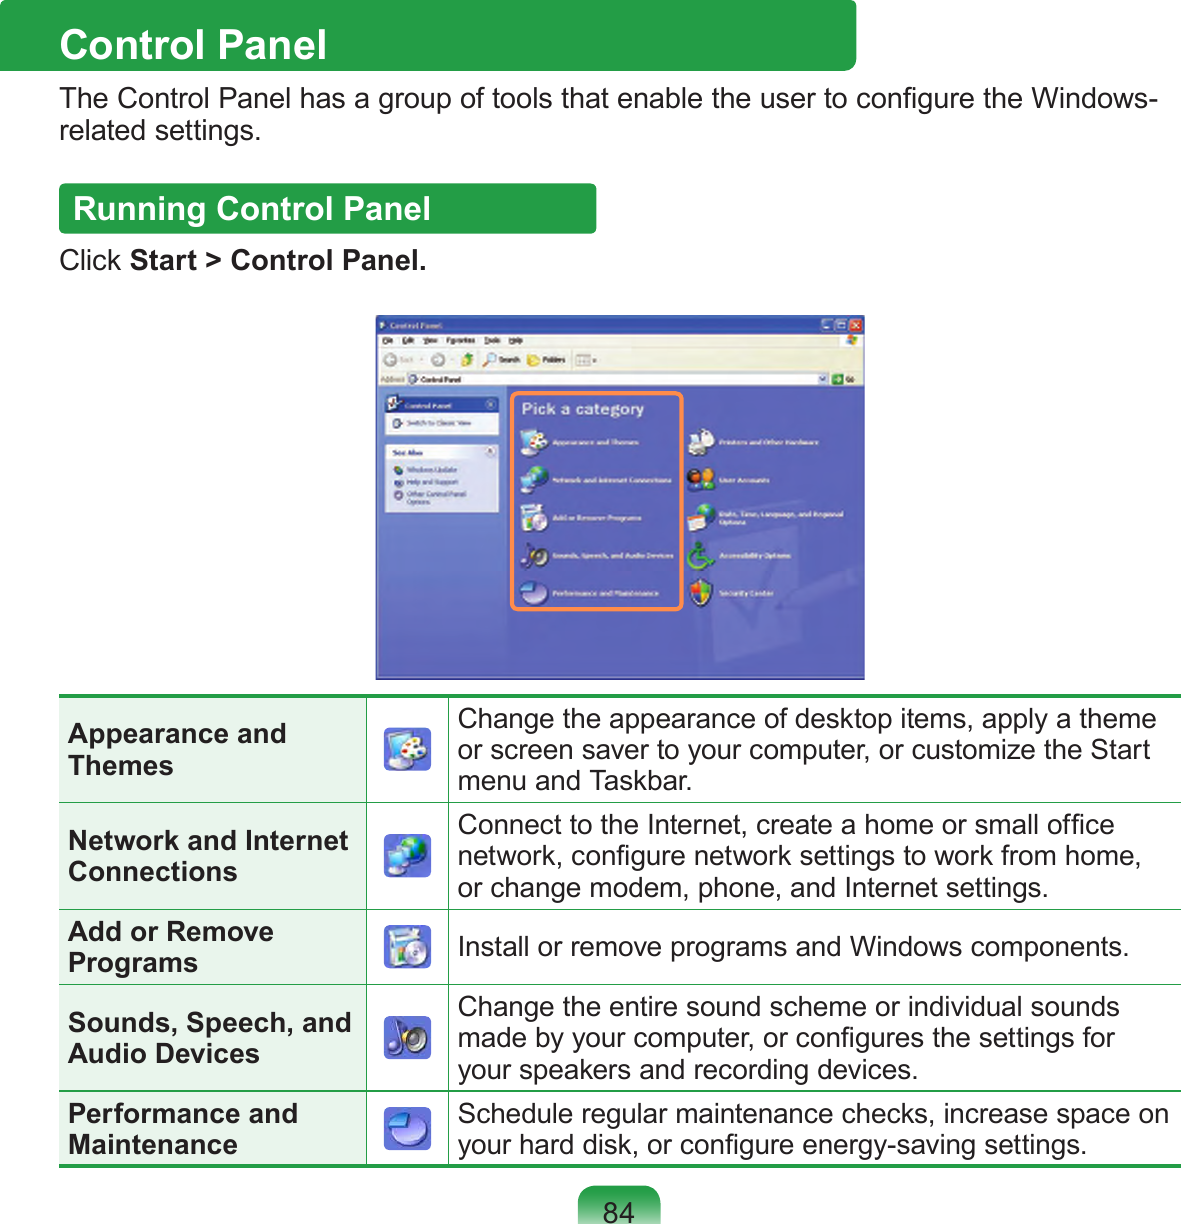 84Control PanelThe Control Panel has a group of tools that enable the user to congure the Windows-related settings.Running Control PanelClick Start &gt; Control Panel.Appearance and ThemesChange the appearance of desktop items, apply a theme or screen saver to your computer, or customize the Start menu and Taskbar.Network and Internet ConnectionsConnect to the Internet, create a home or small ofce network, congure network settings to work from home, or change modem, phone, and Internet settings.Add or Remove Programs Install or remove programs and Windows components.Sounds, Speech, and Audio DevicesChange the entire sound scheme or individual sounds made by your computer, or congures the settings for your speakers and recording devices.Performance and MaintenanceSchedule regular maintenance checks, increase space on your hard disk, or congure energy-saving settings.